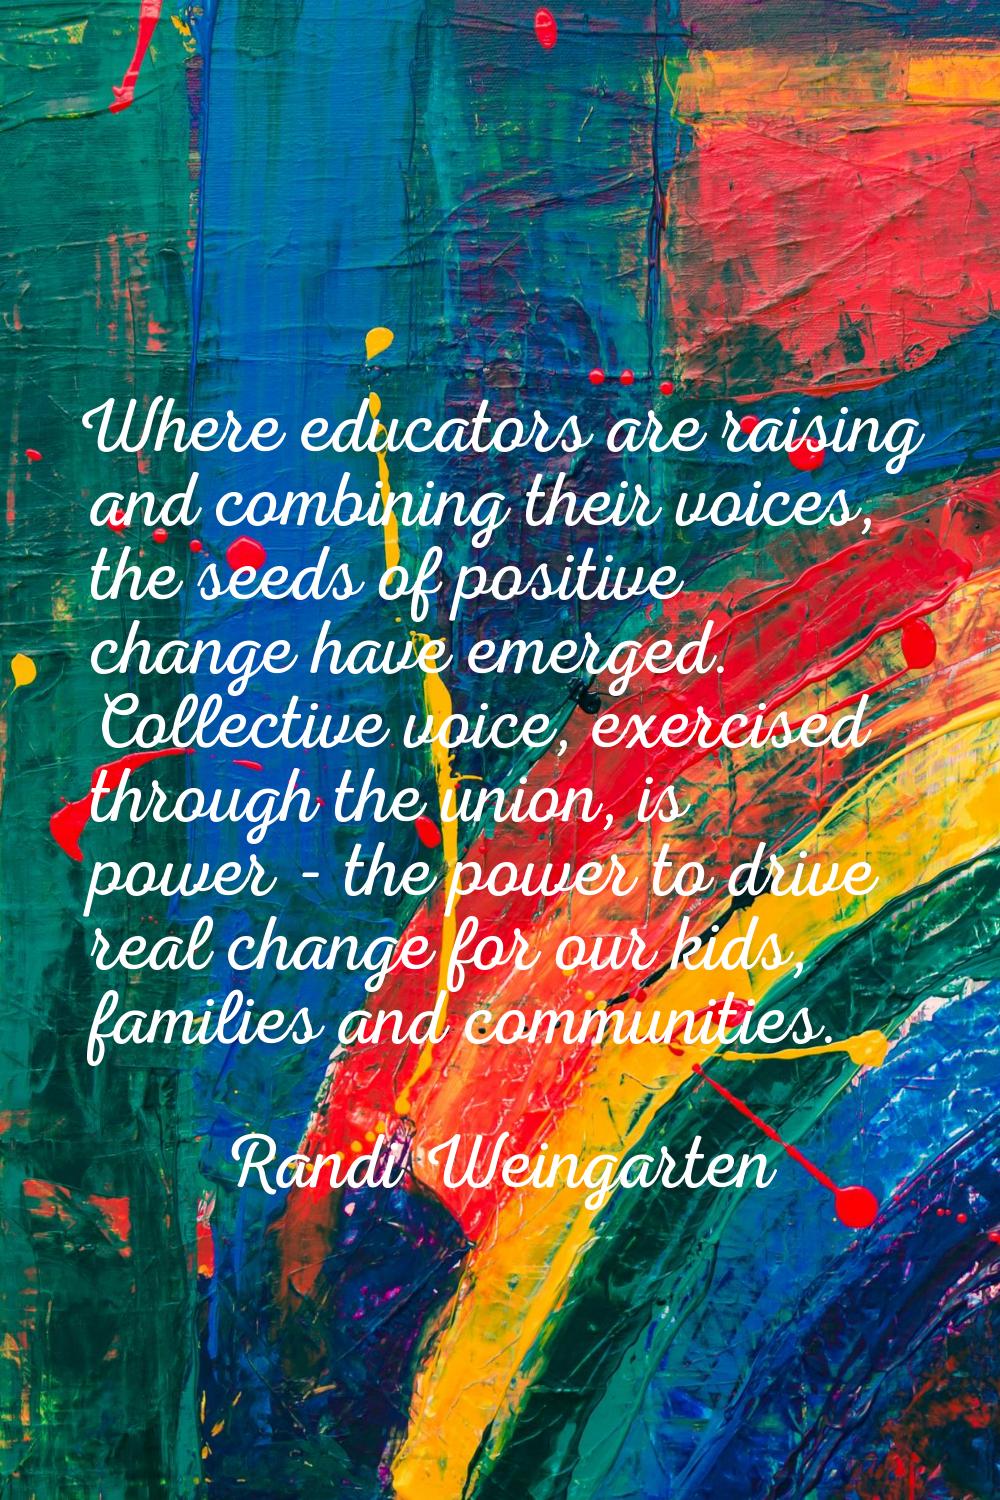 Where educators are raising and combining their voices, the seeds of positive change have emerged. 